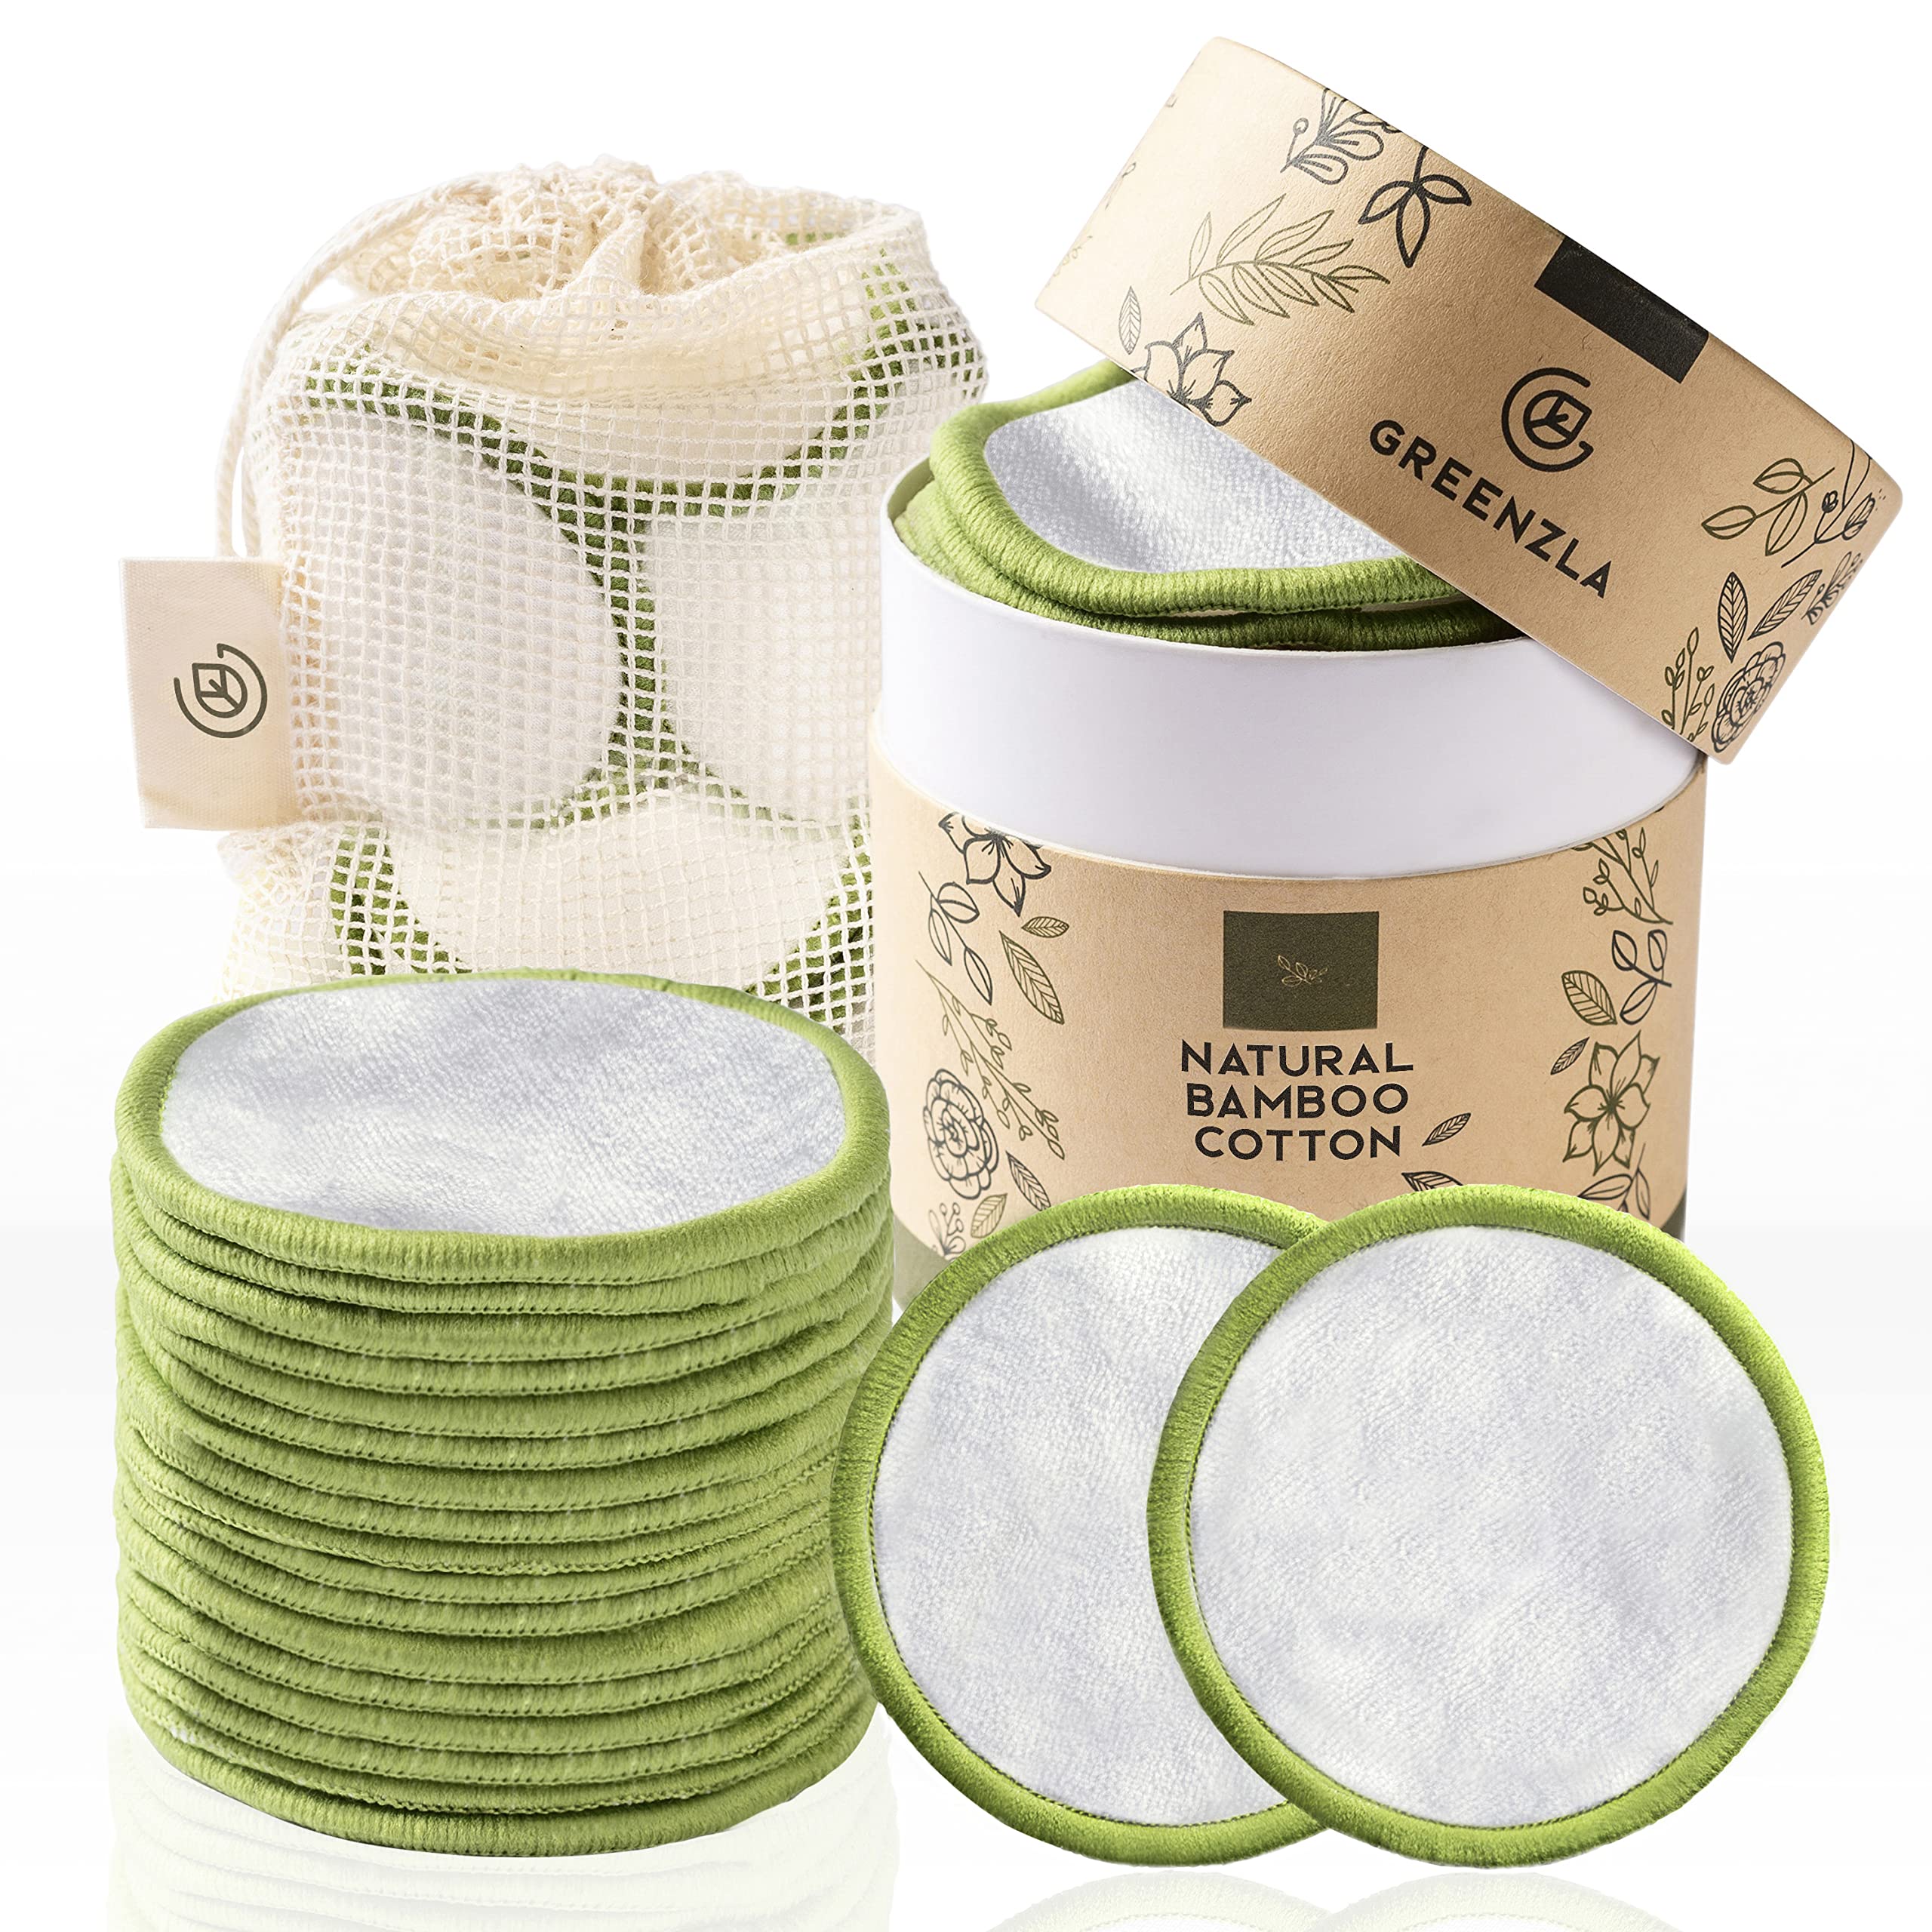 Greenzla Reusable Makeup Remover Pads (20 Pack) With a Washable Laundry Bag And Round Box for Storage, Eco-friendly Reusable Bamboo Cotton Pads For All Skin Types